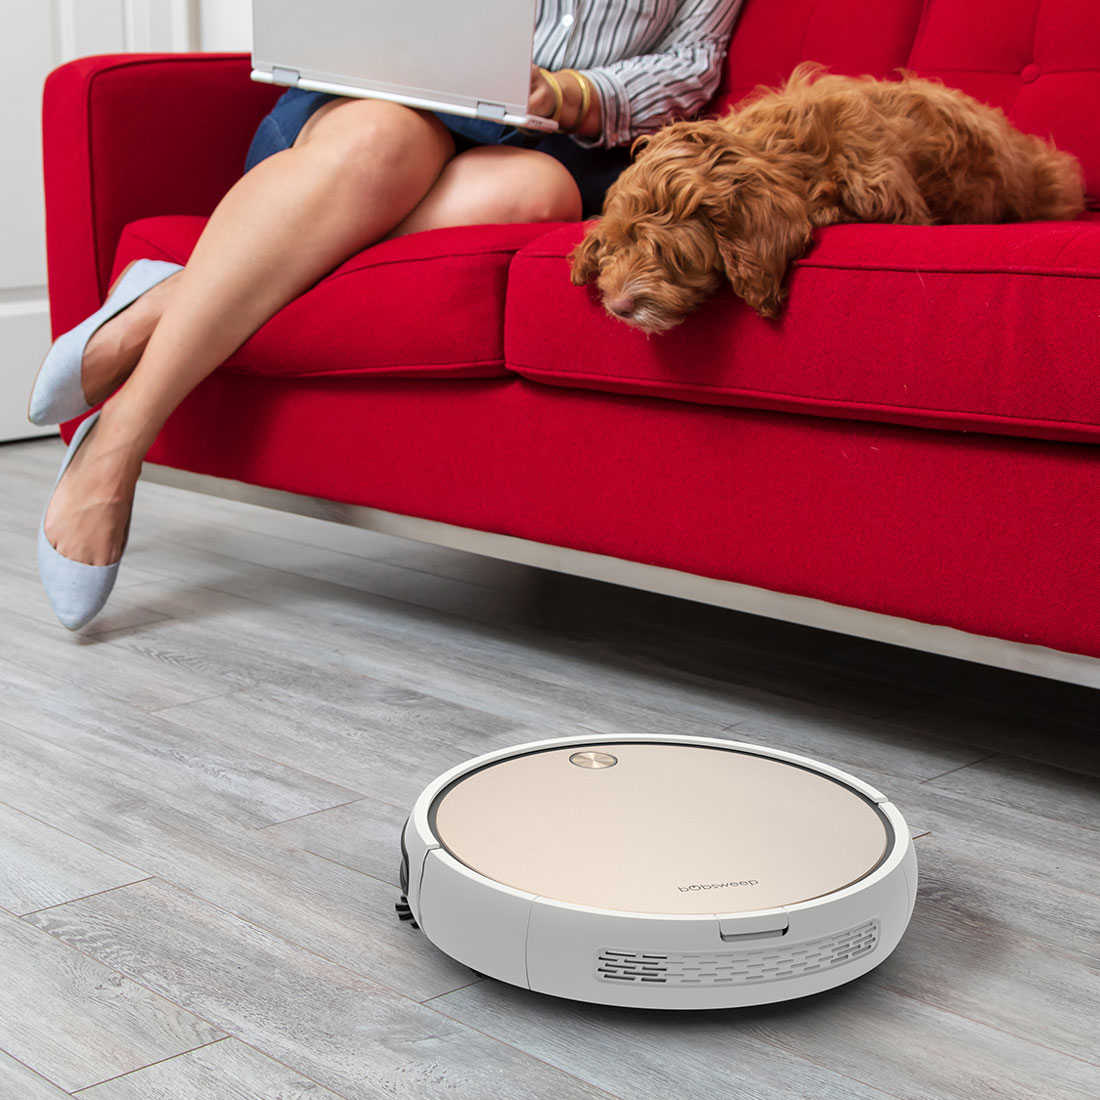 bObsweep Pro Robotic Vacuum Cleaner, Gold - image 5 of 6